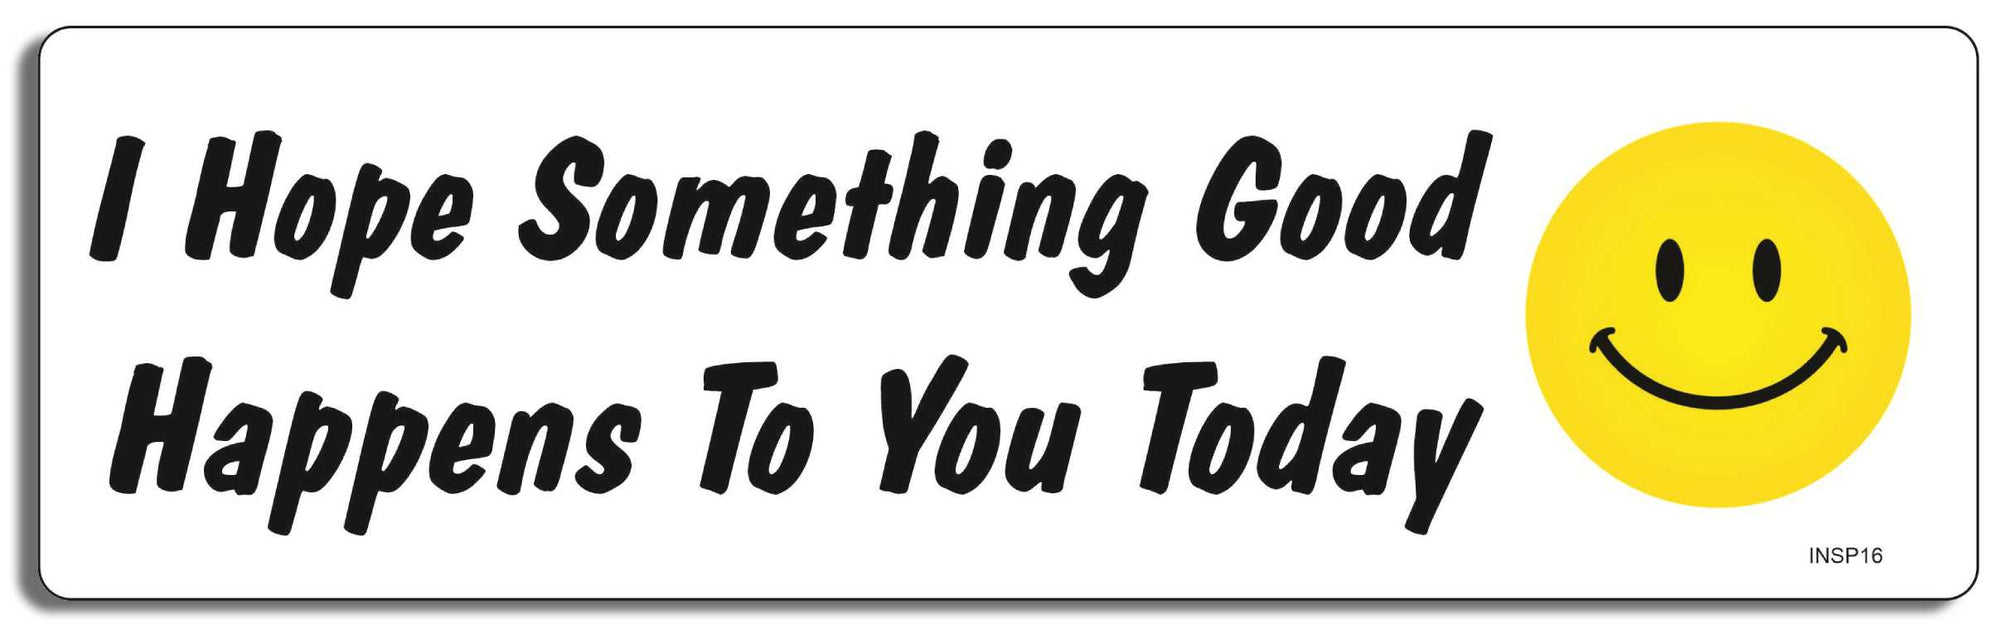 I Hope Something Good Happens To You Today - 3" x 10" -  Decal Bumper Sticker-quotation Bumper Sticker Car Magnet I Hope Something Good Happens To-  Decal for carsKindness